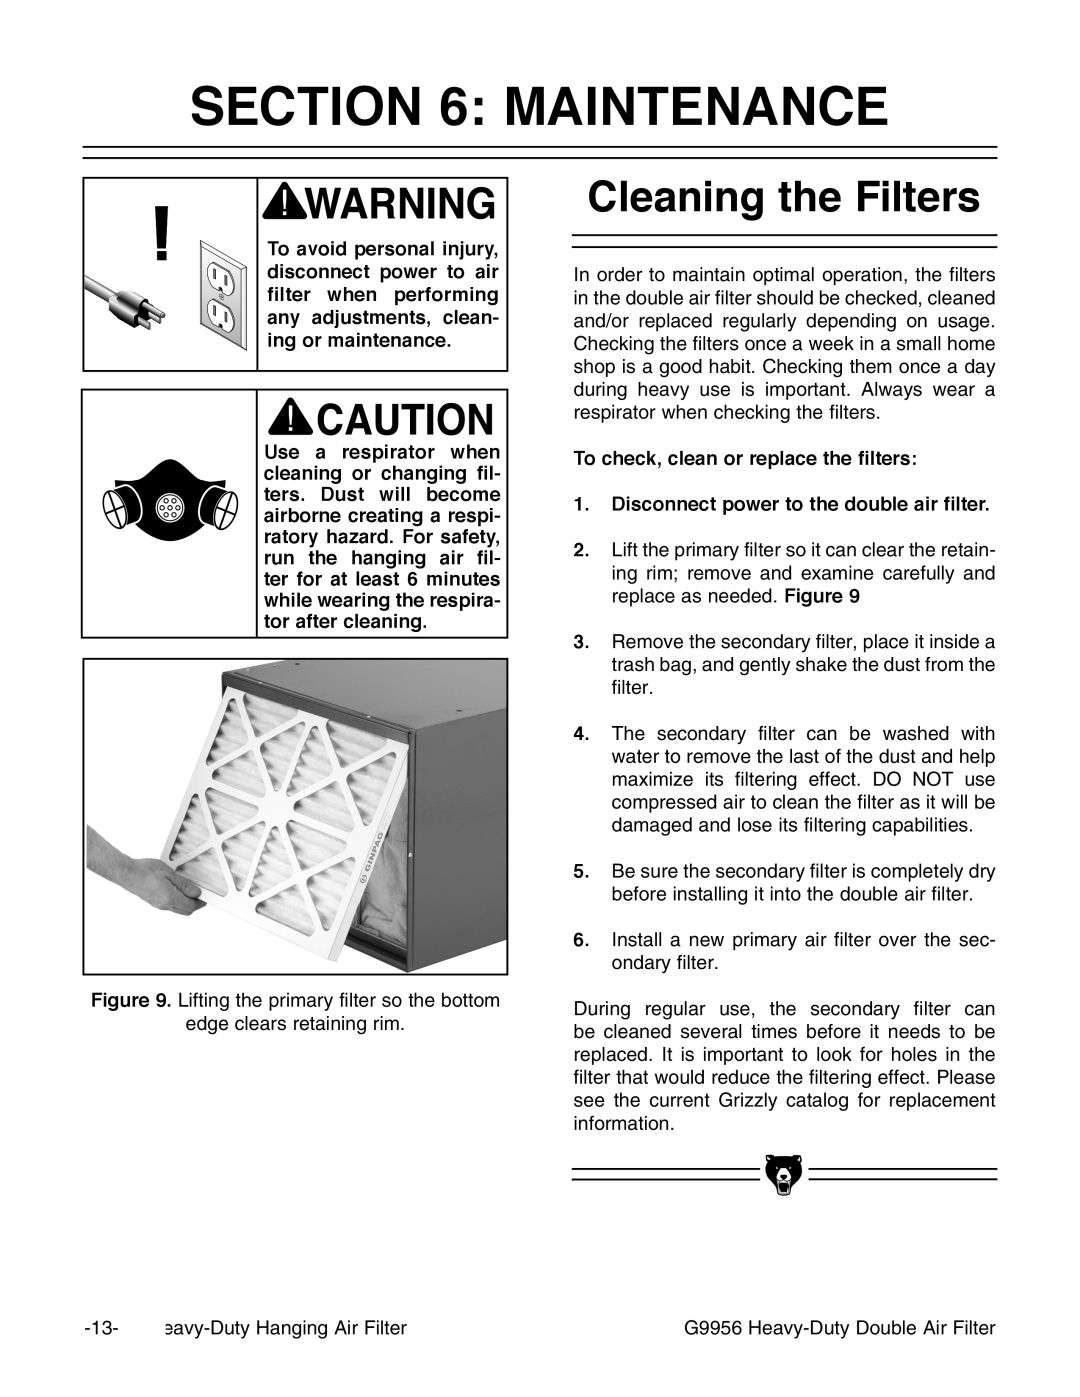 Grizzly G9956 instruction manual Maintenance, Cleaning the Filters 